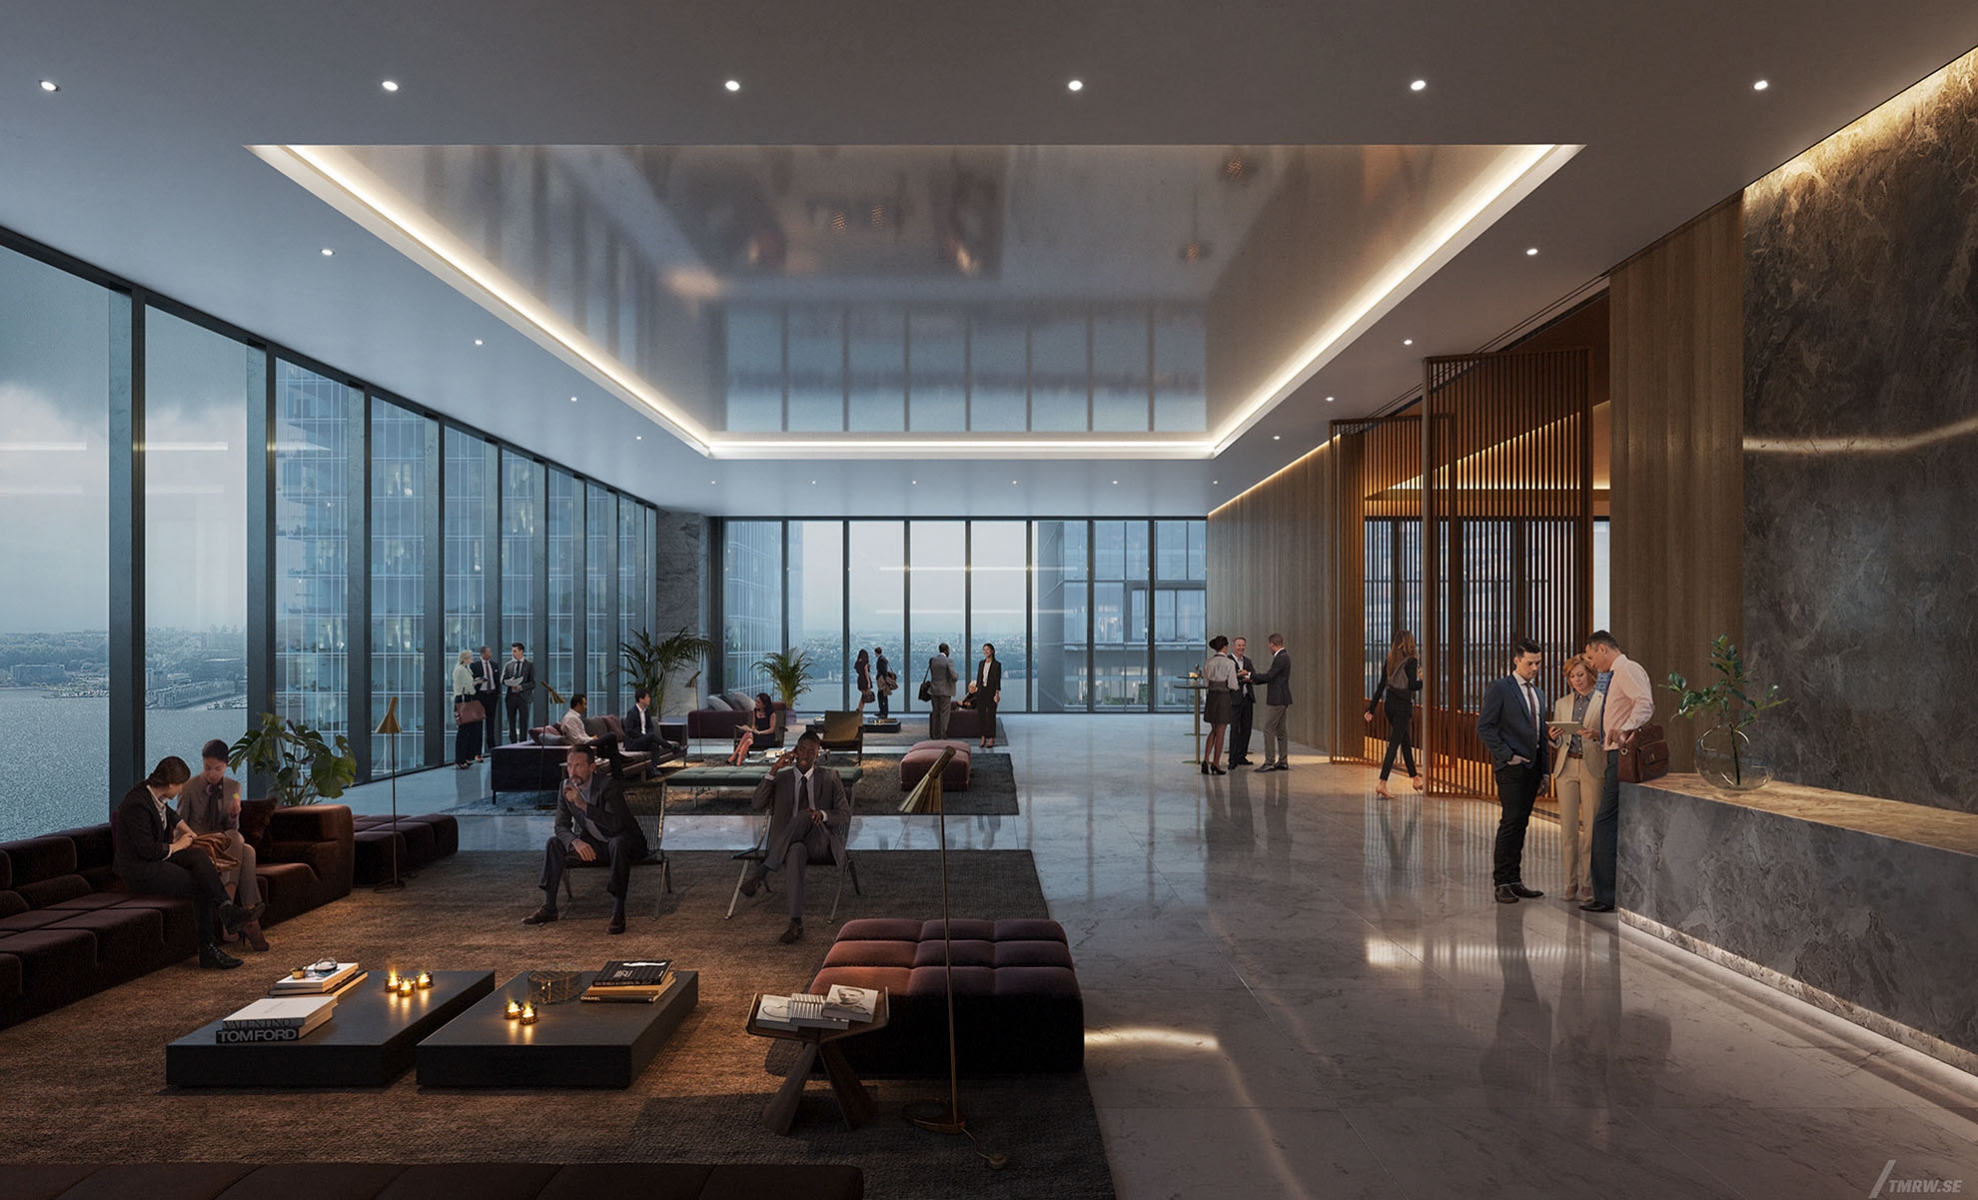 Architectural visualization of Hudon Yards for foster & Partner, an office building in evening from an interior view.